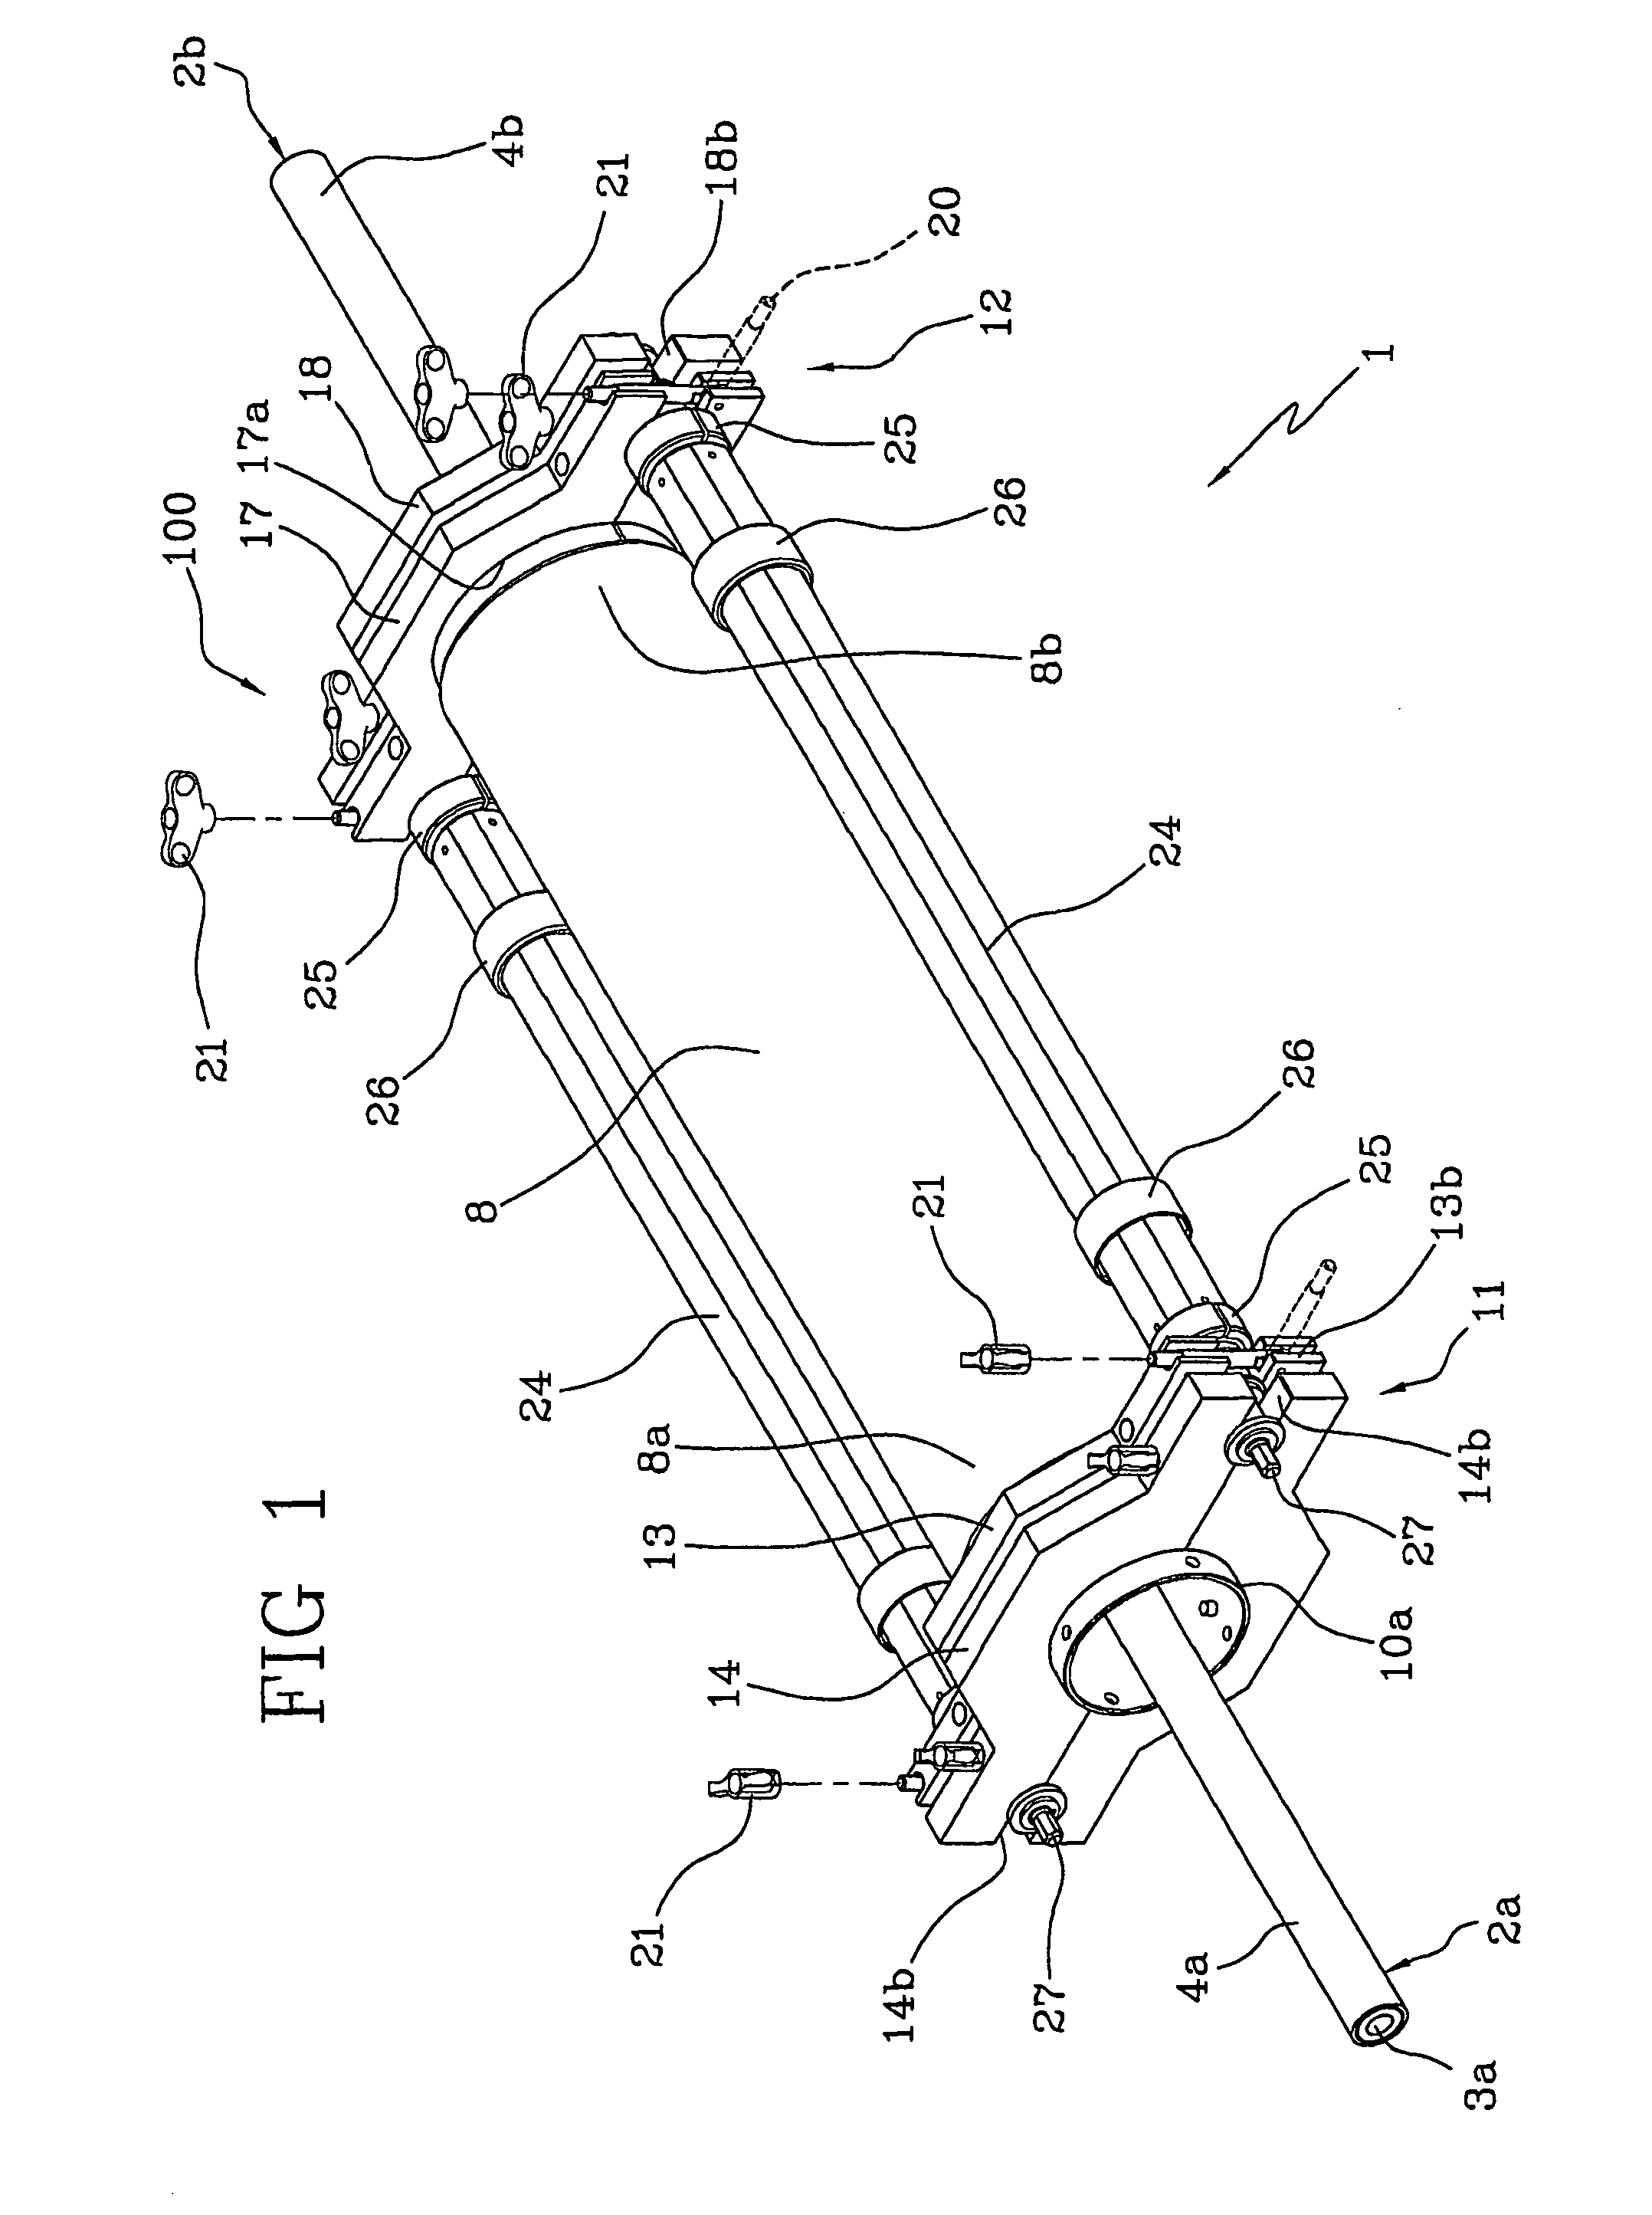 Method for joining a pair of electric cables